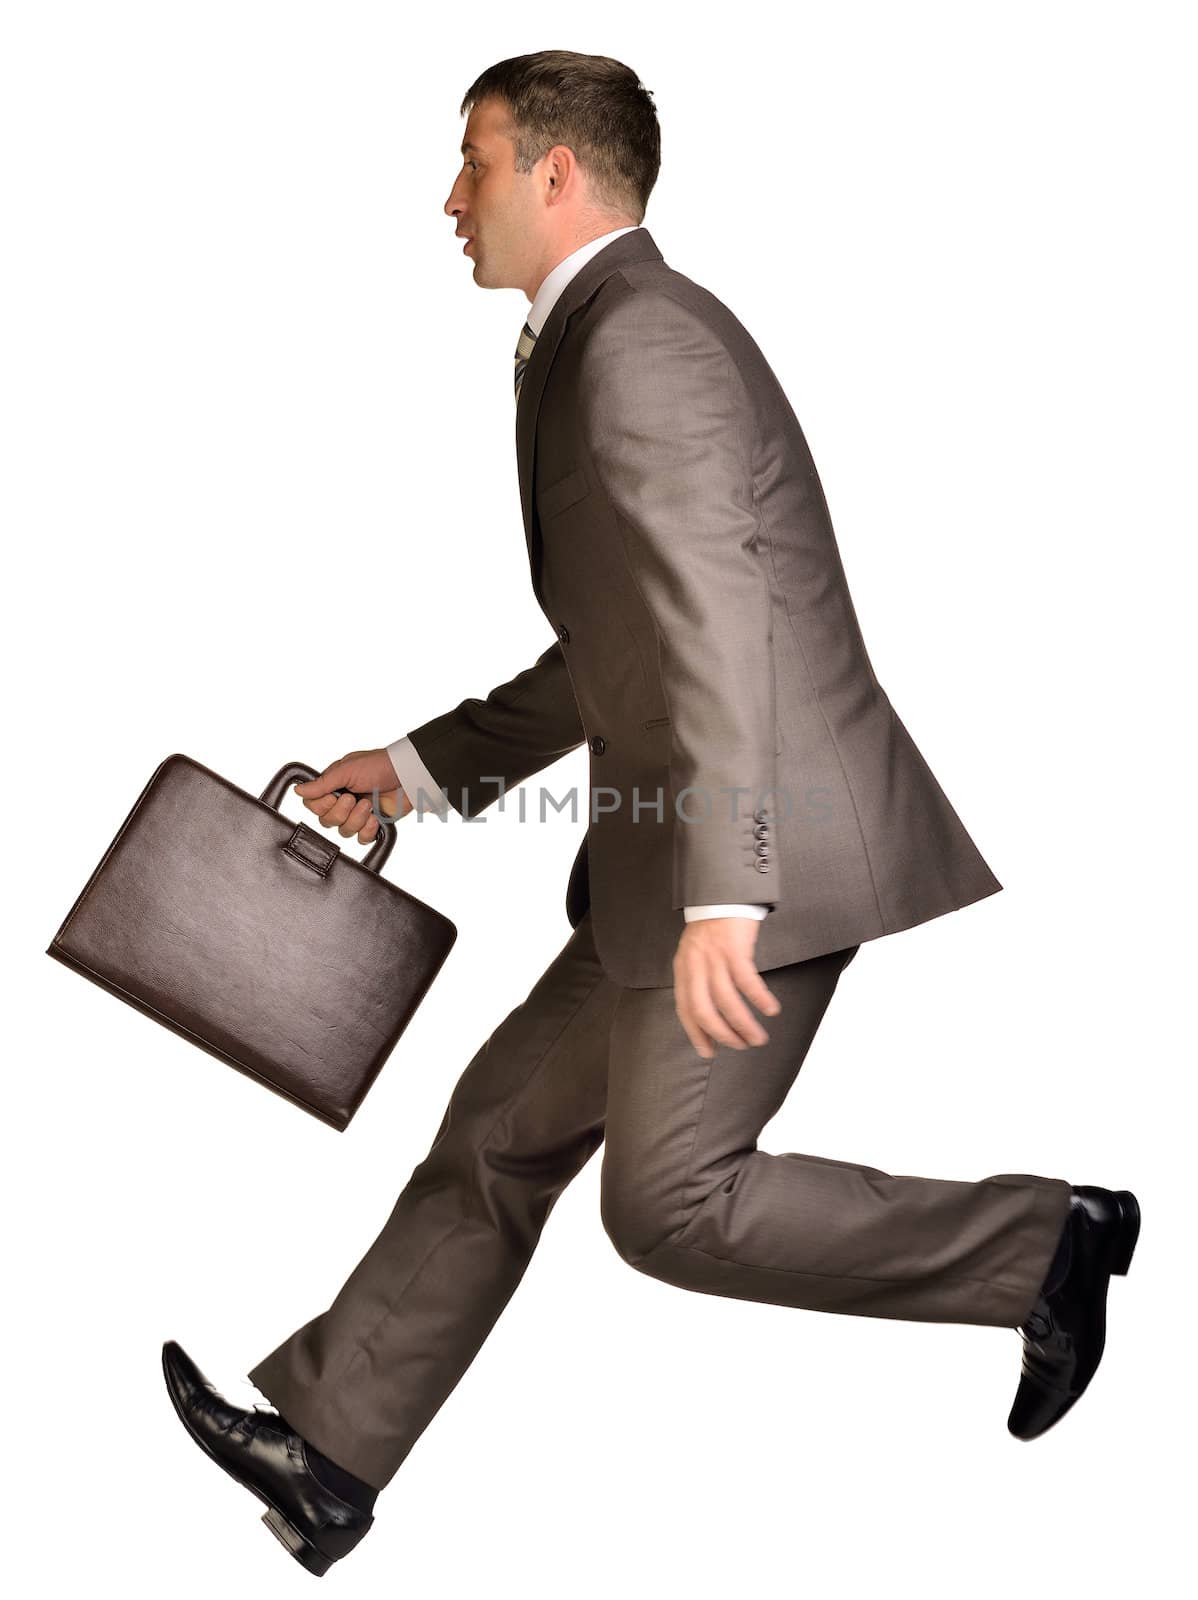 Businessman running with a briefcase. Isolated on white background